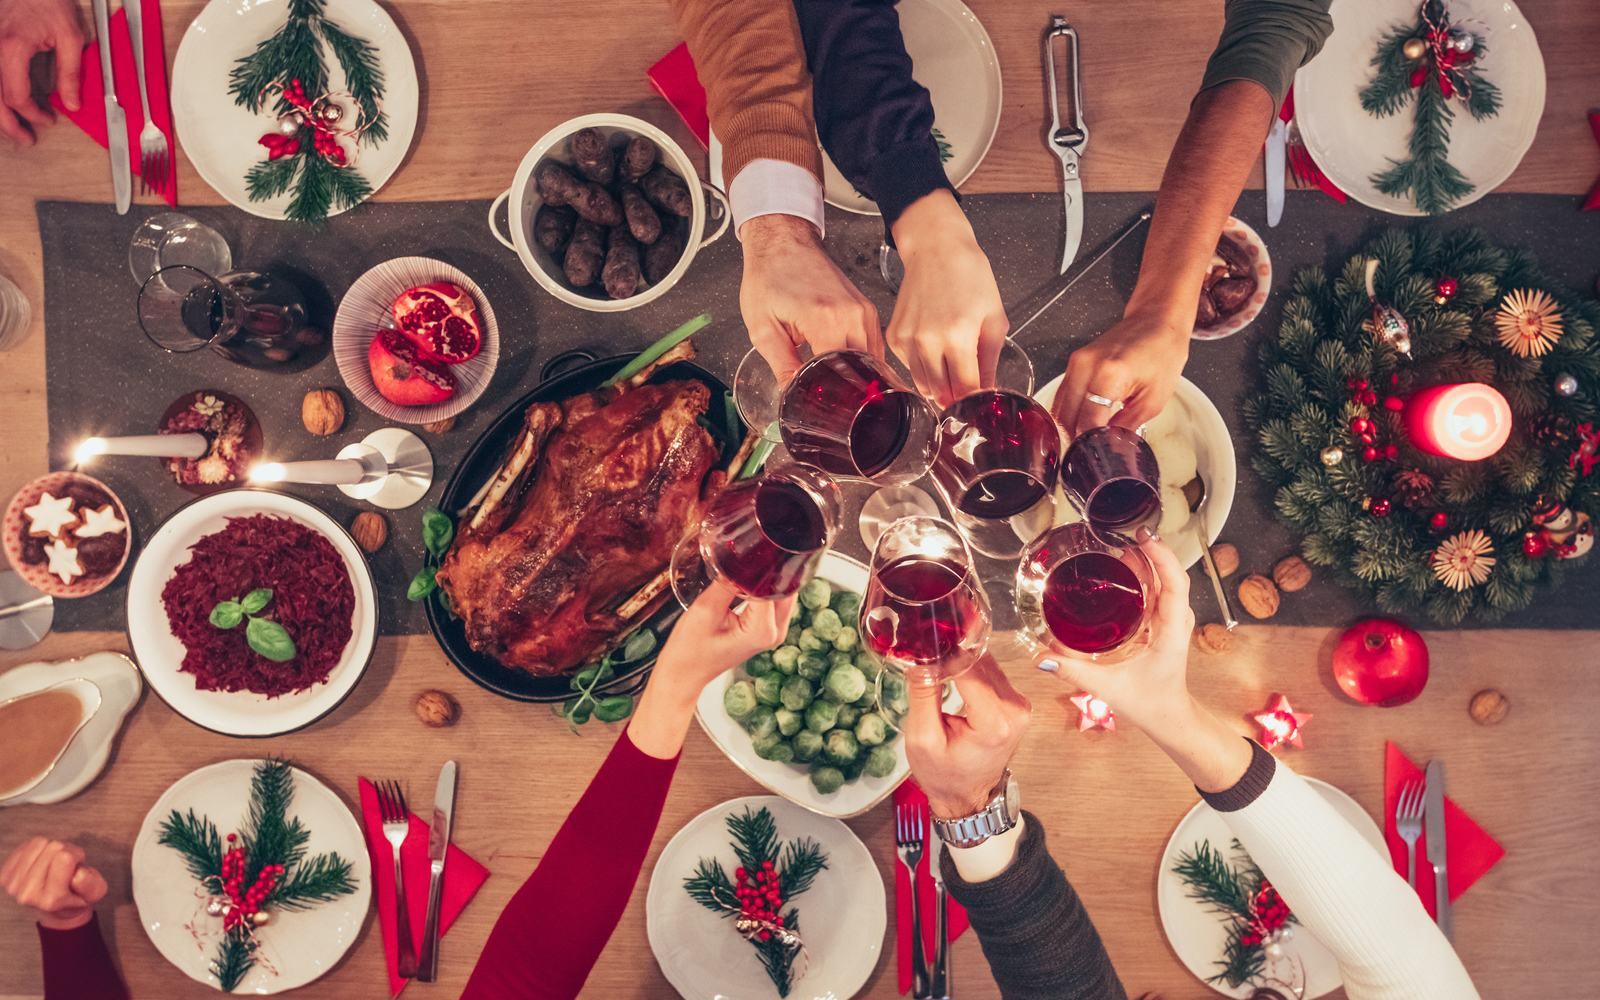 Christmas party with friends? How to set up the table and what to prepare